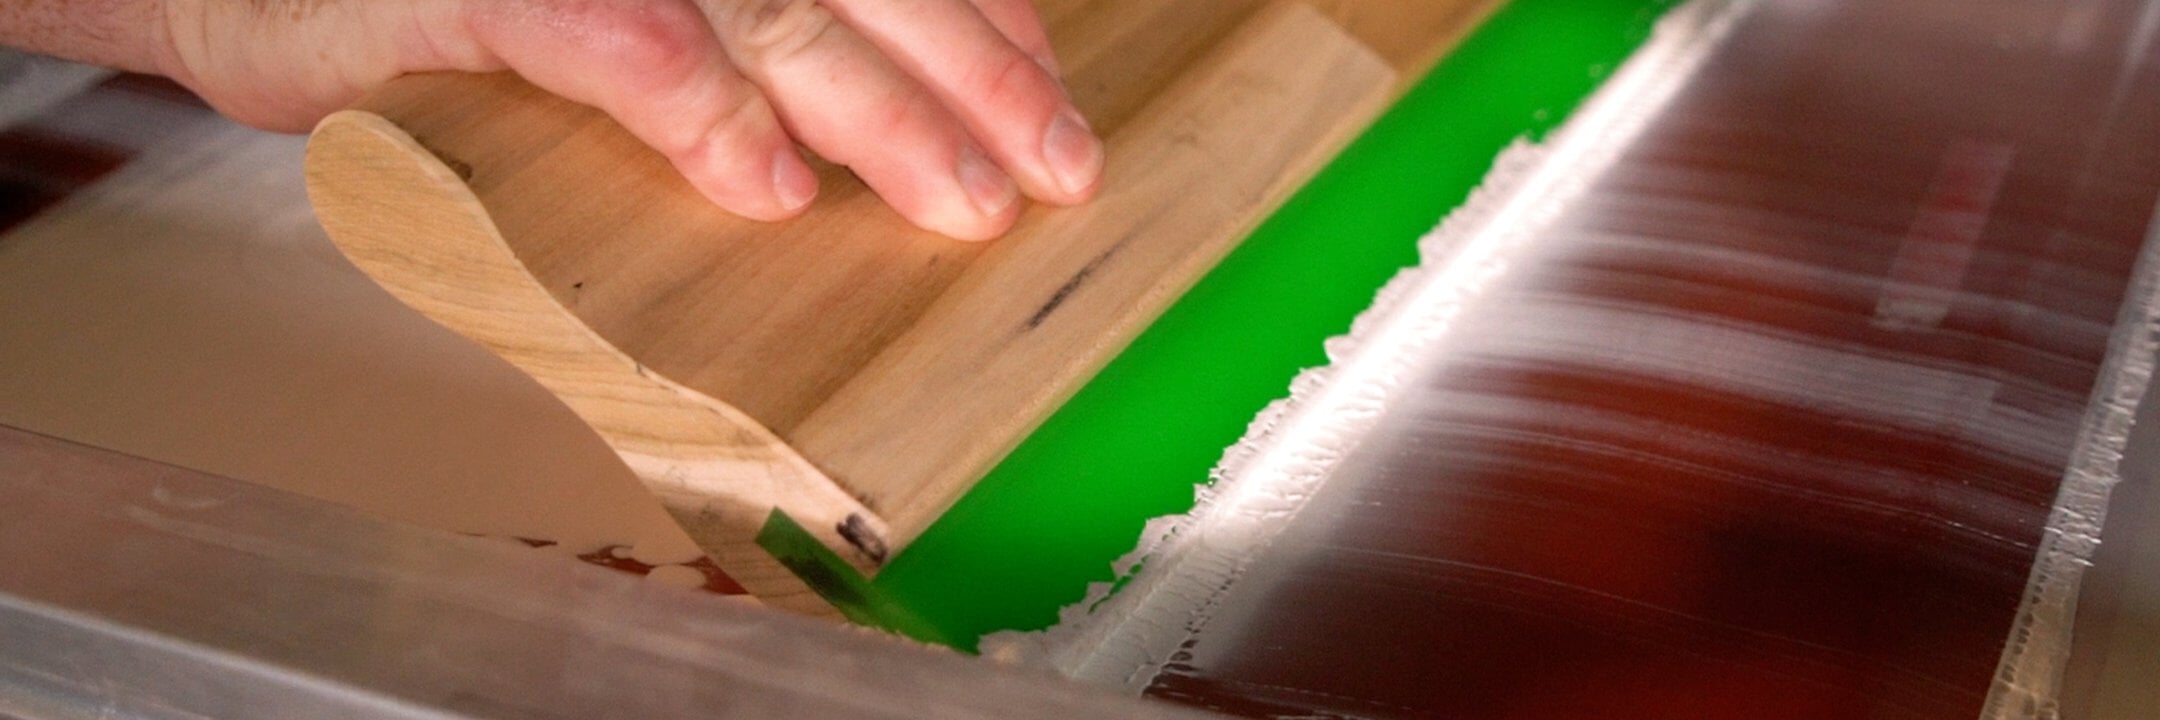 Pushing Vs Pulling a Screen Printing Squeegee – Learn How To